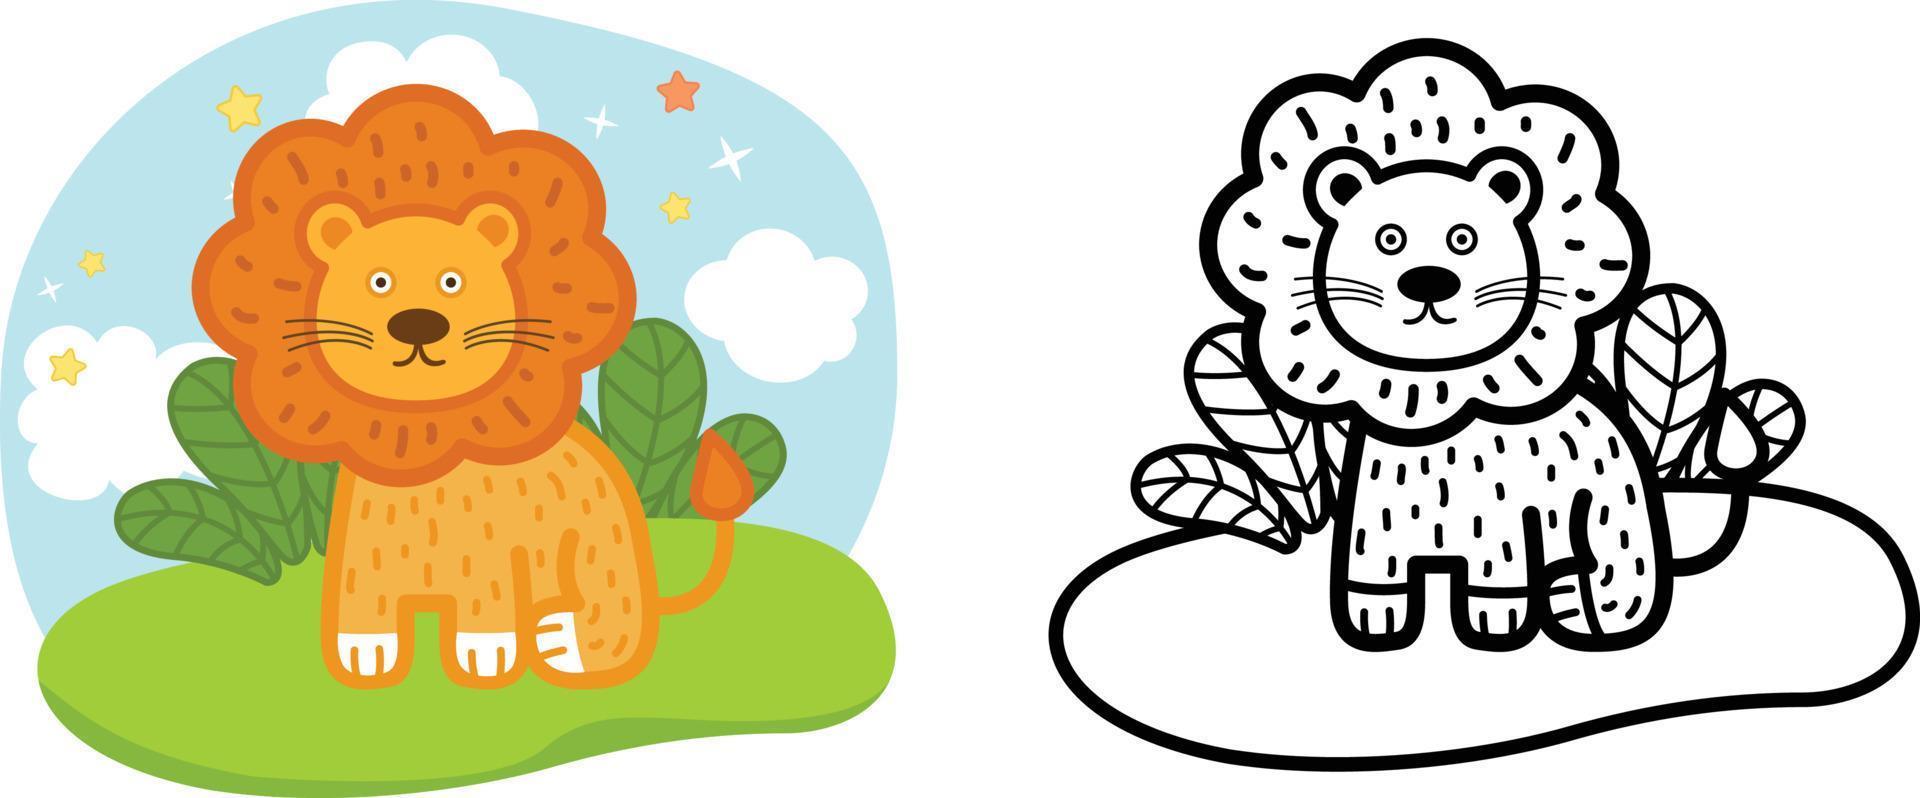 Illustration of educational coloring book animal lion vector